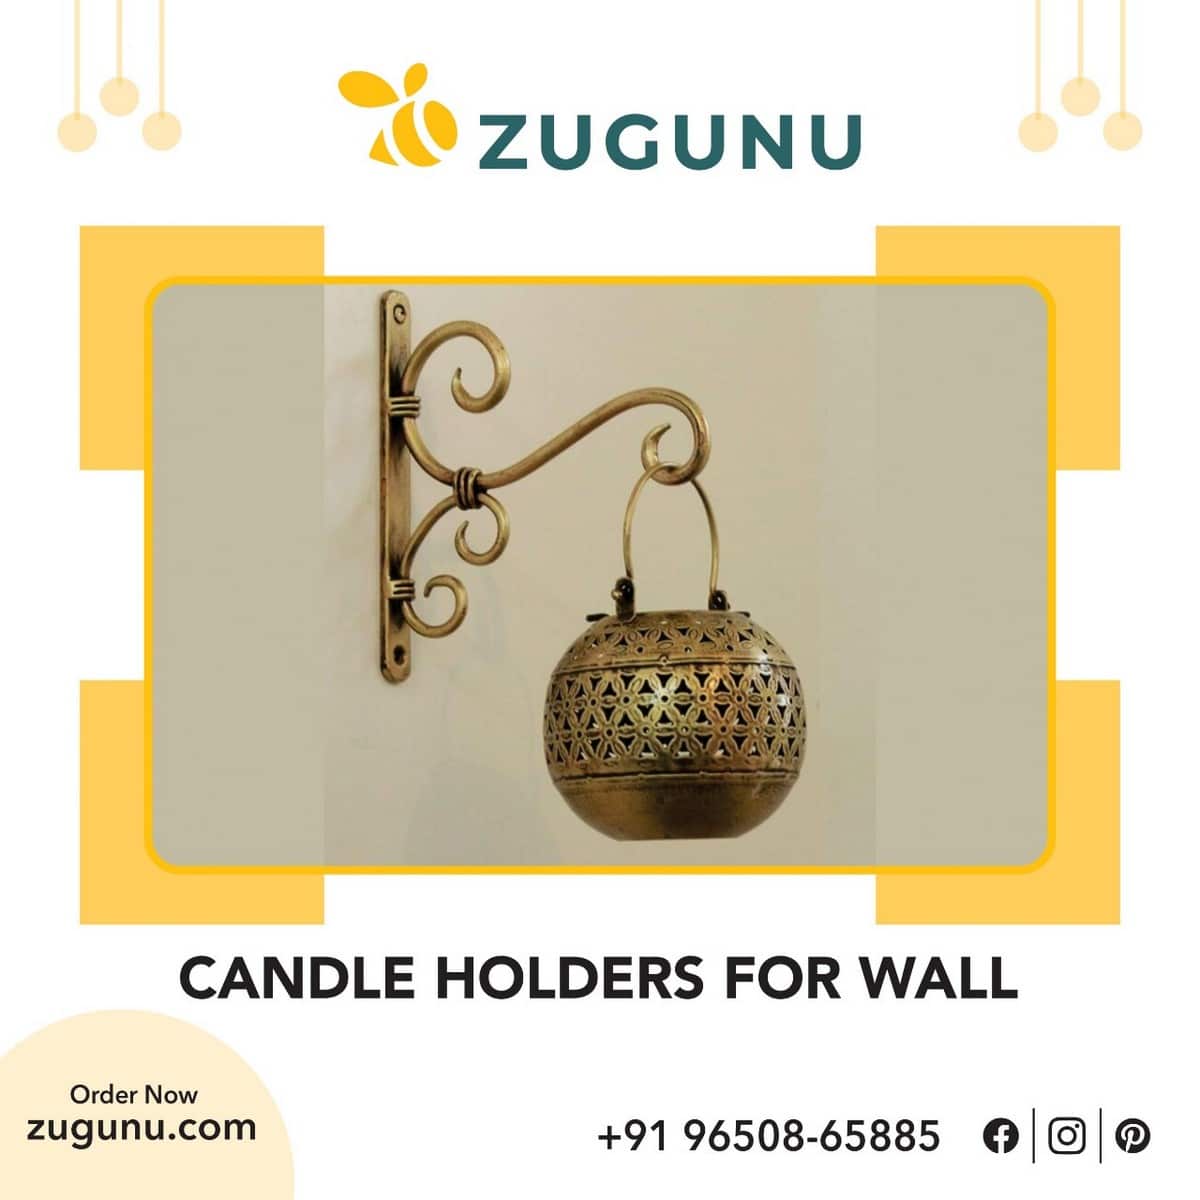 Artistic Looking Candle Holders For Wall Inside Home